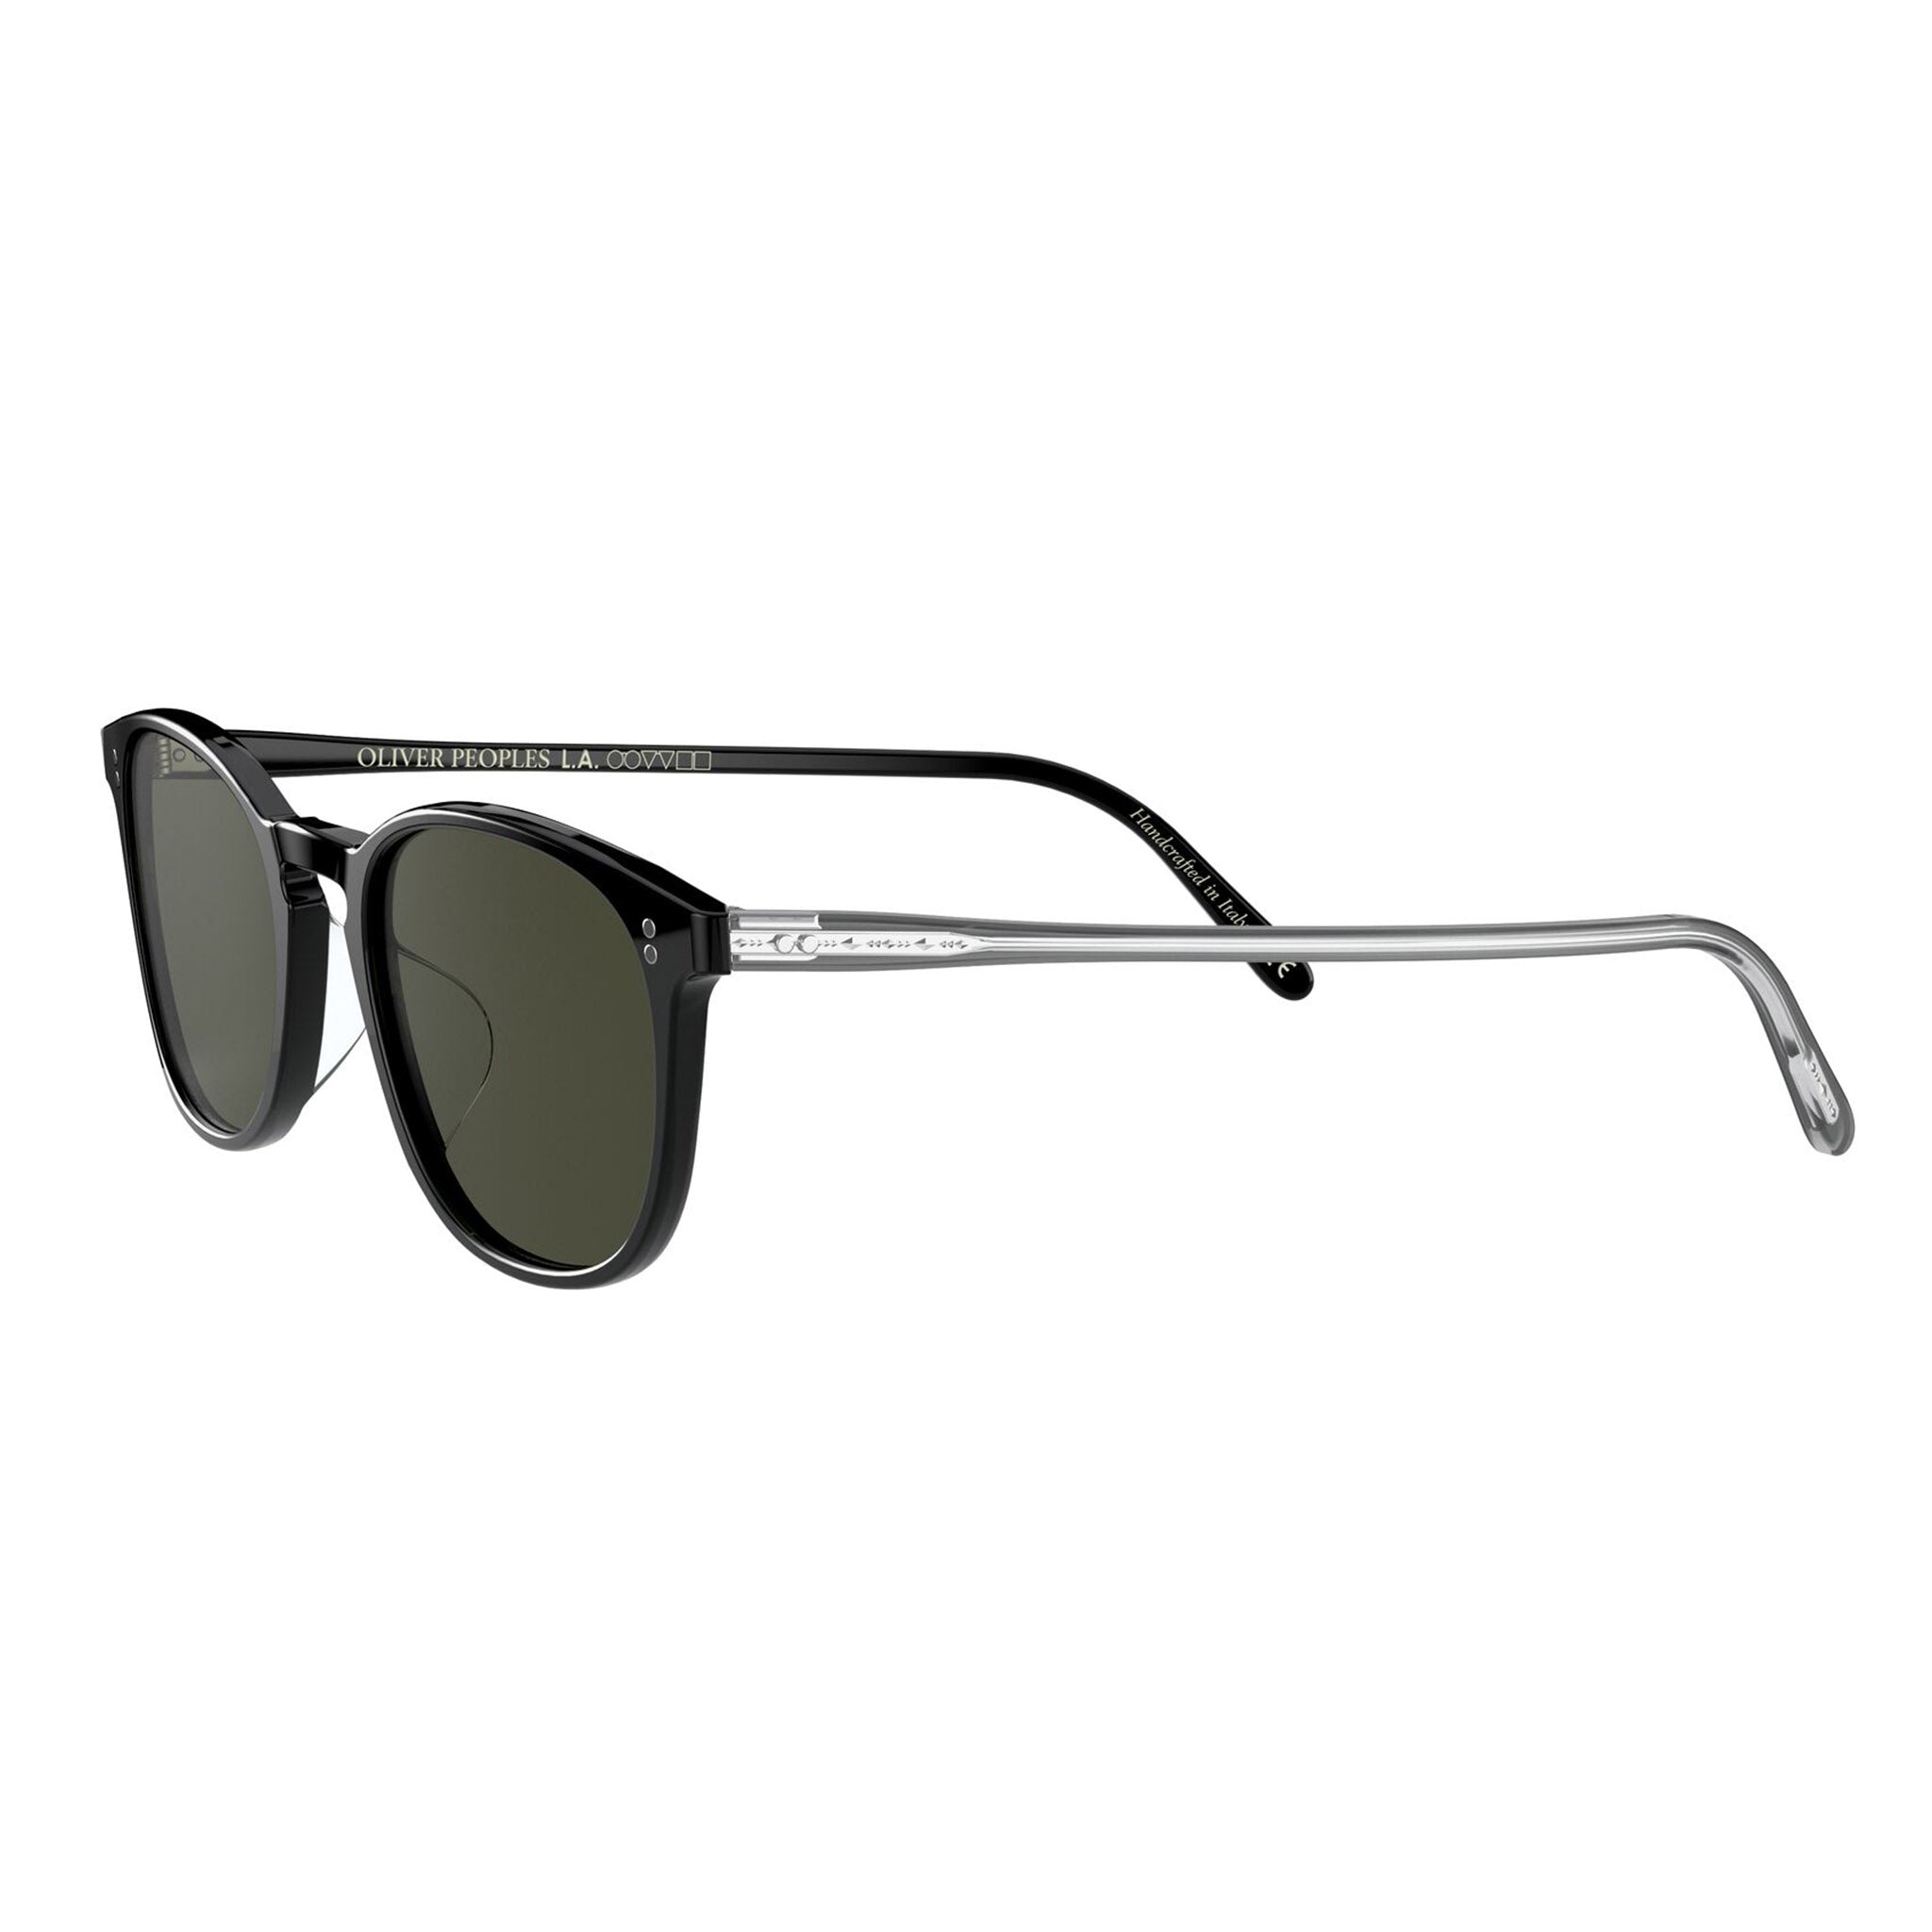 Oliver Peoples Finley Vintage Sun Black with G15 Polar Sunglasses